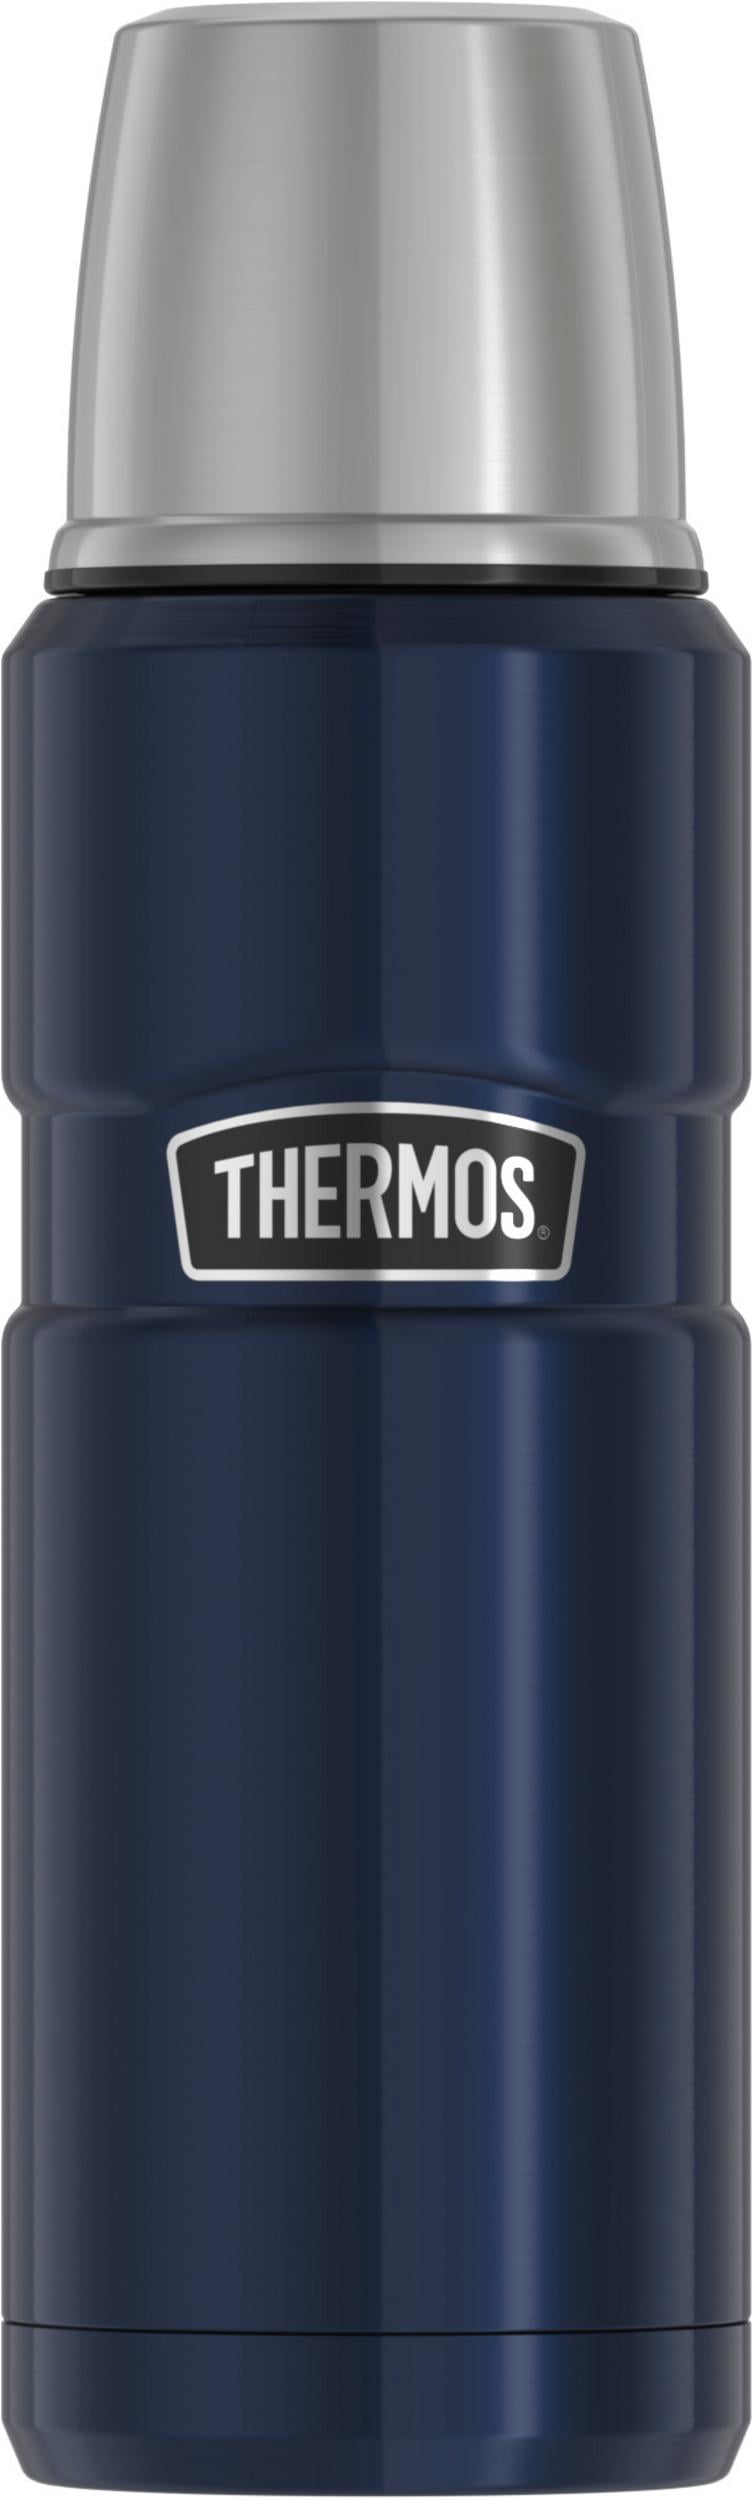 Cooling Royally: Stainless King News from Thermos